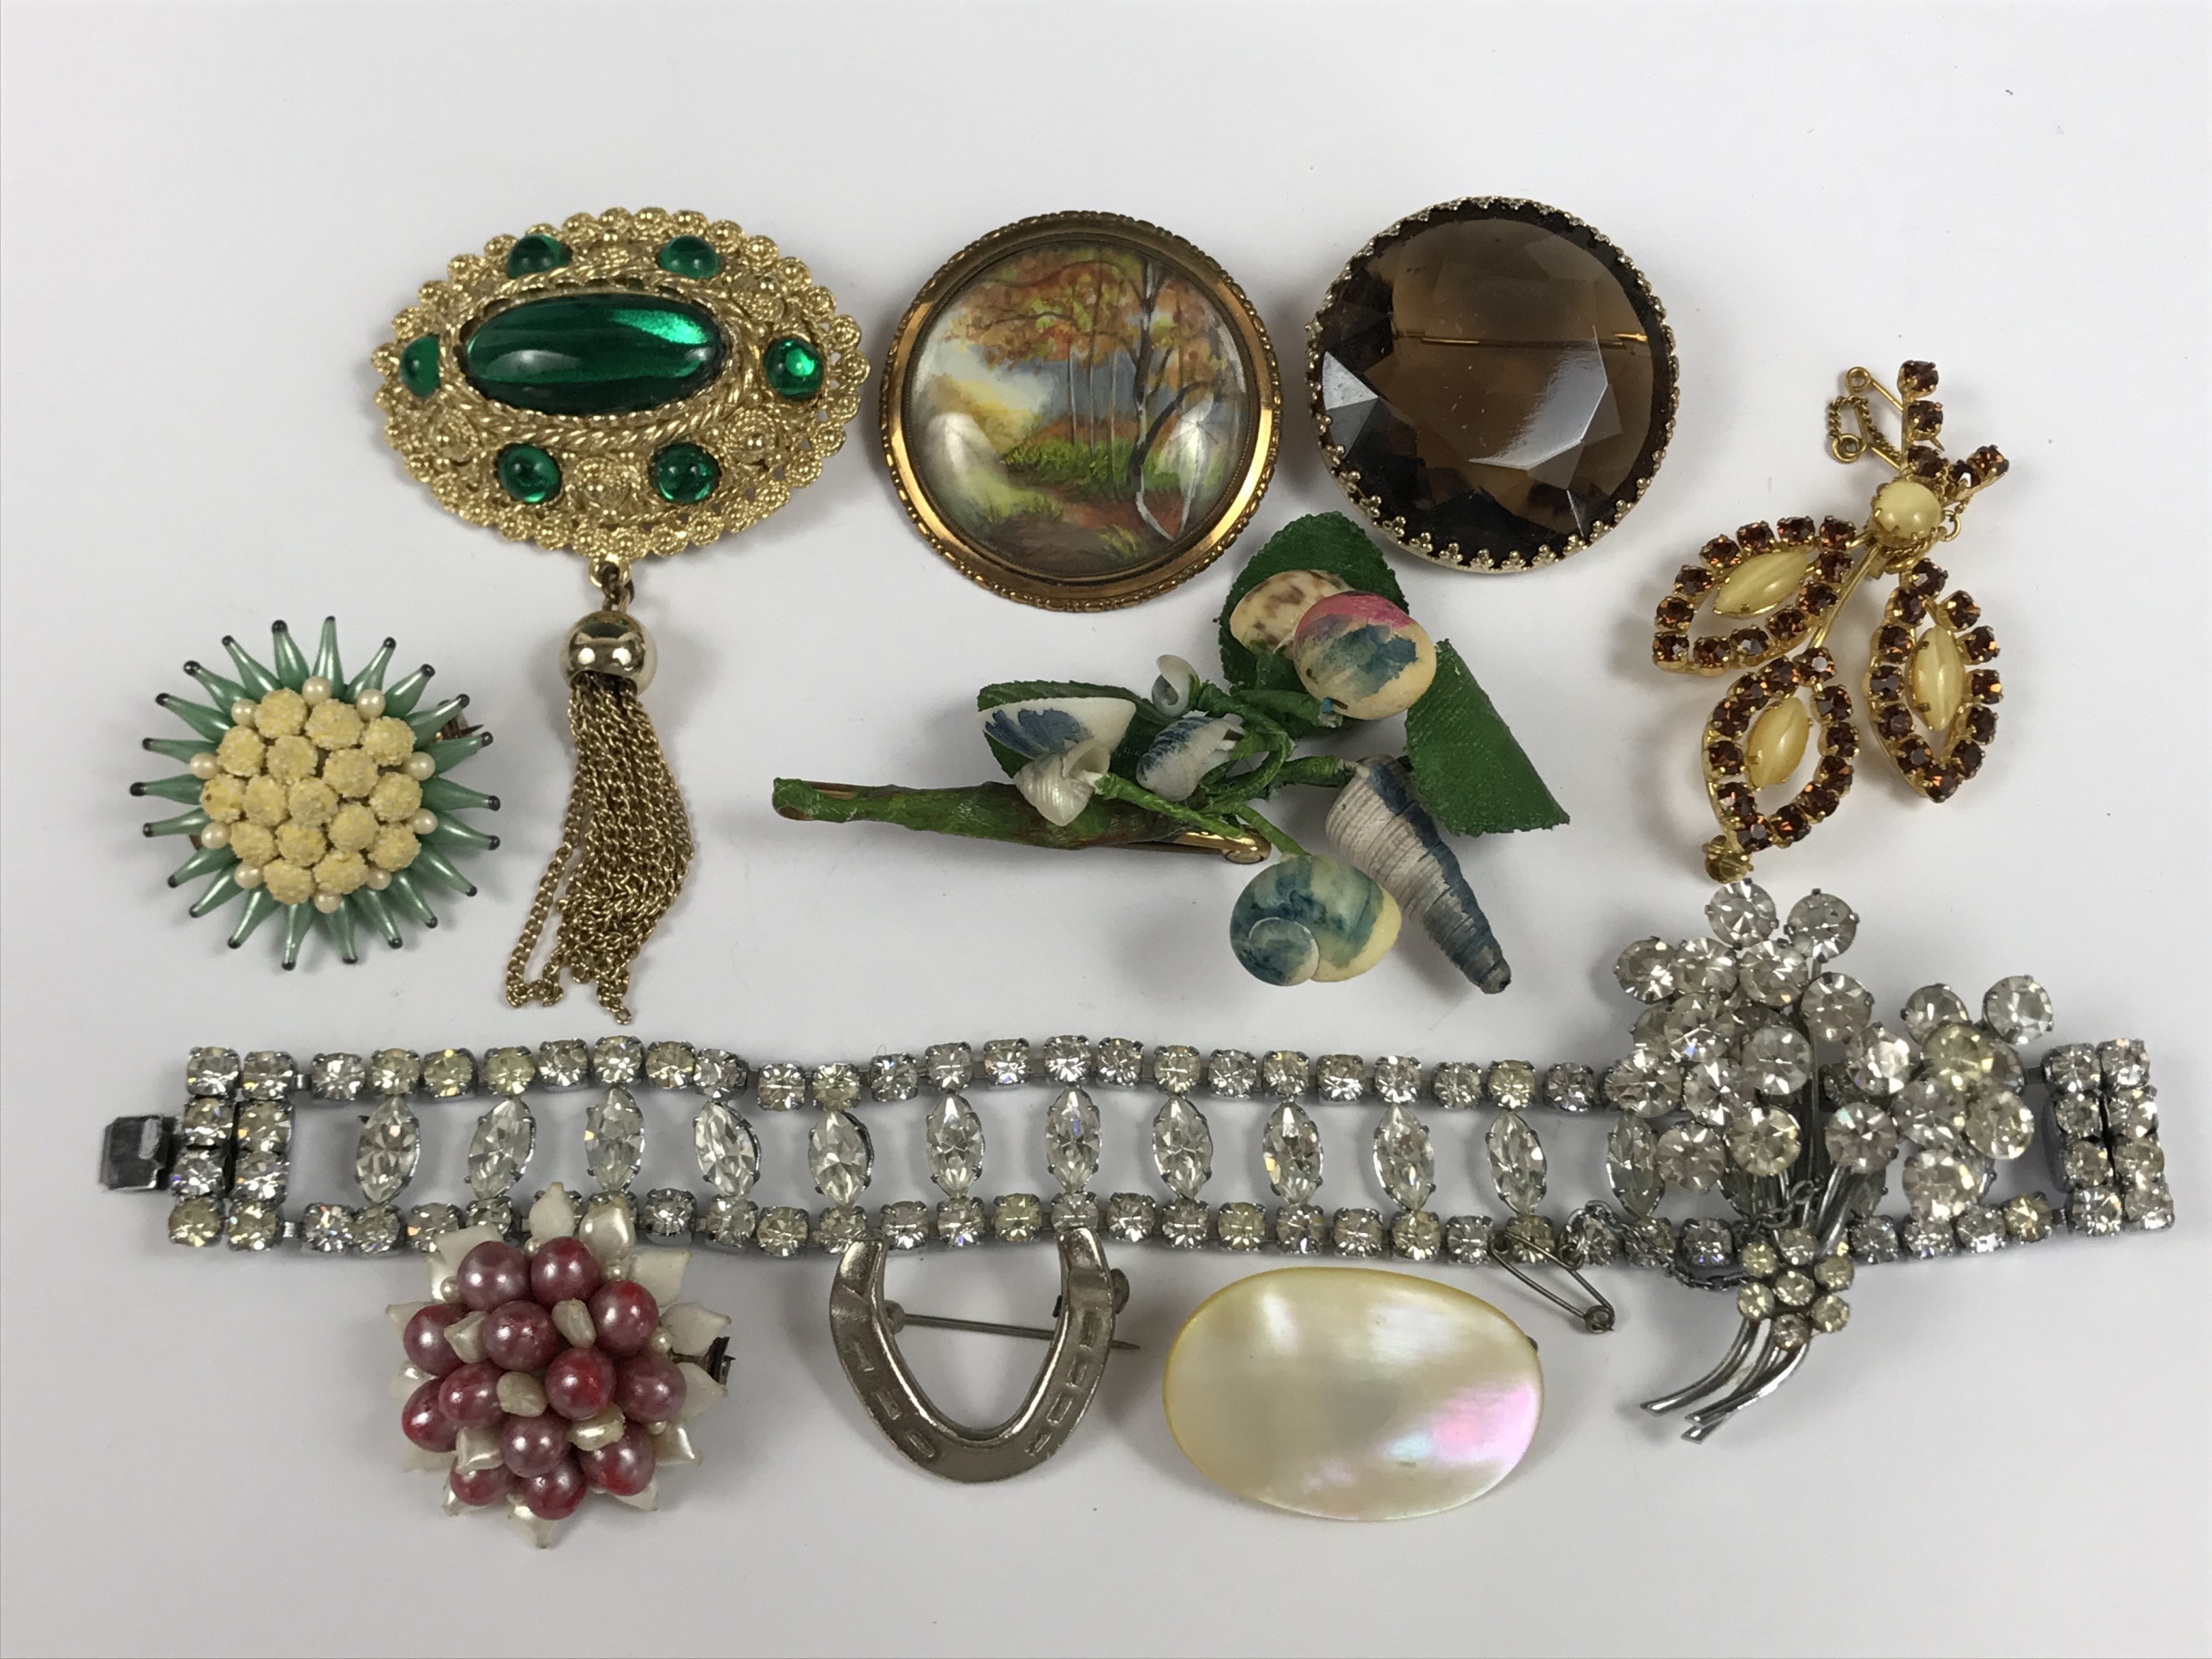 A small quantity of vintage costume jewellery, including a paste bracelet and brooches